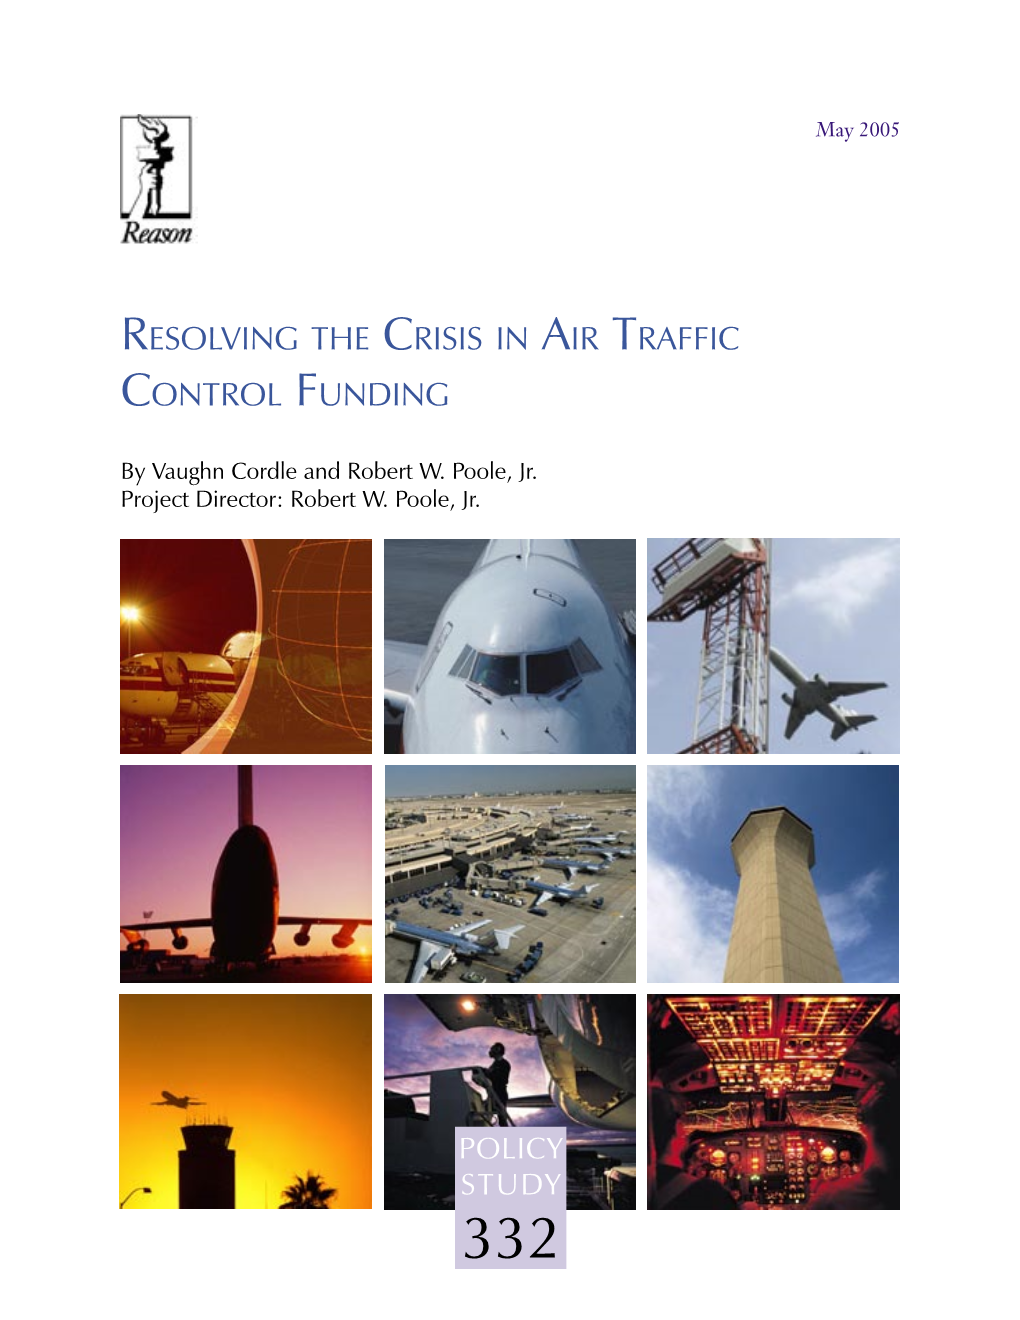 Resolving the Crisis in Air Traffic Control Funding